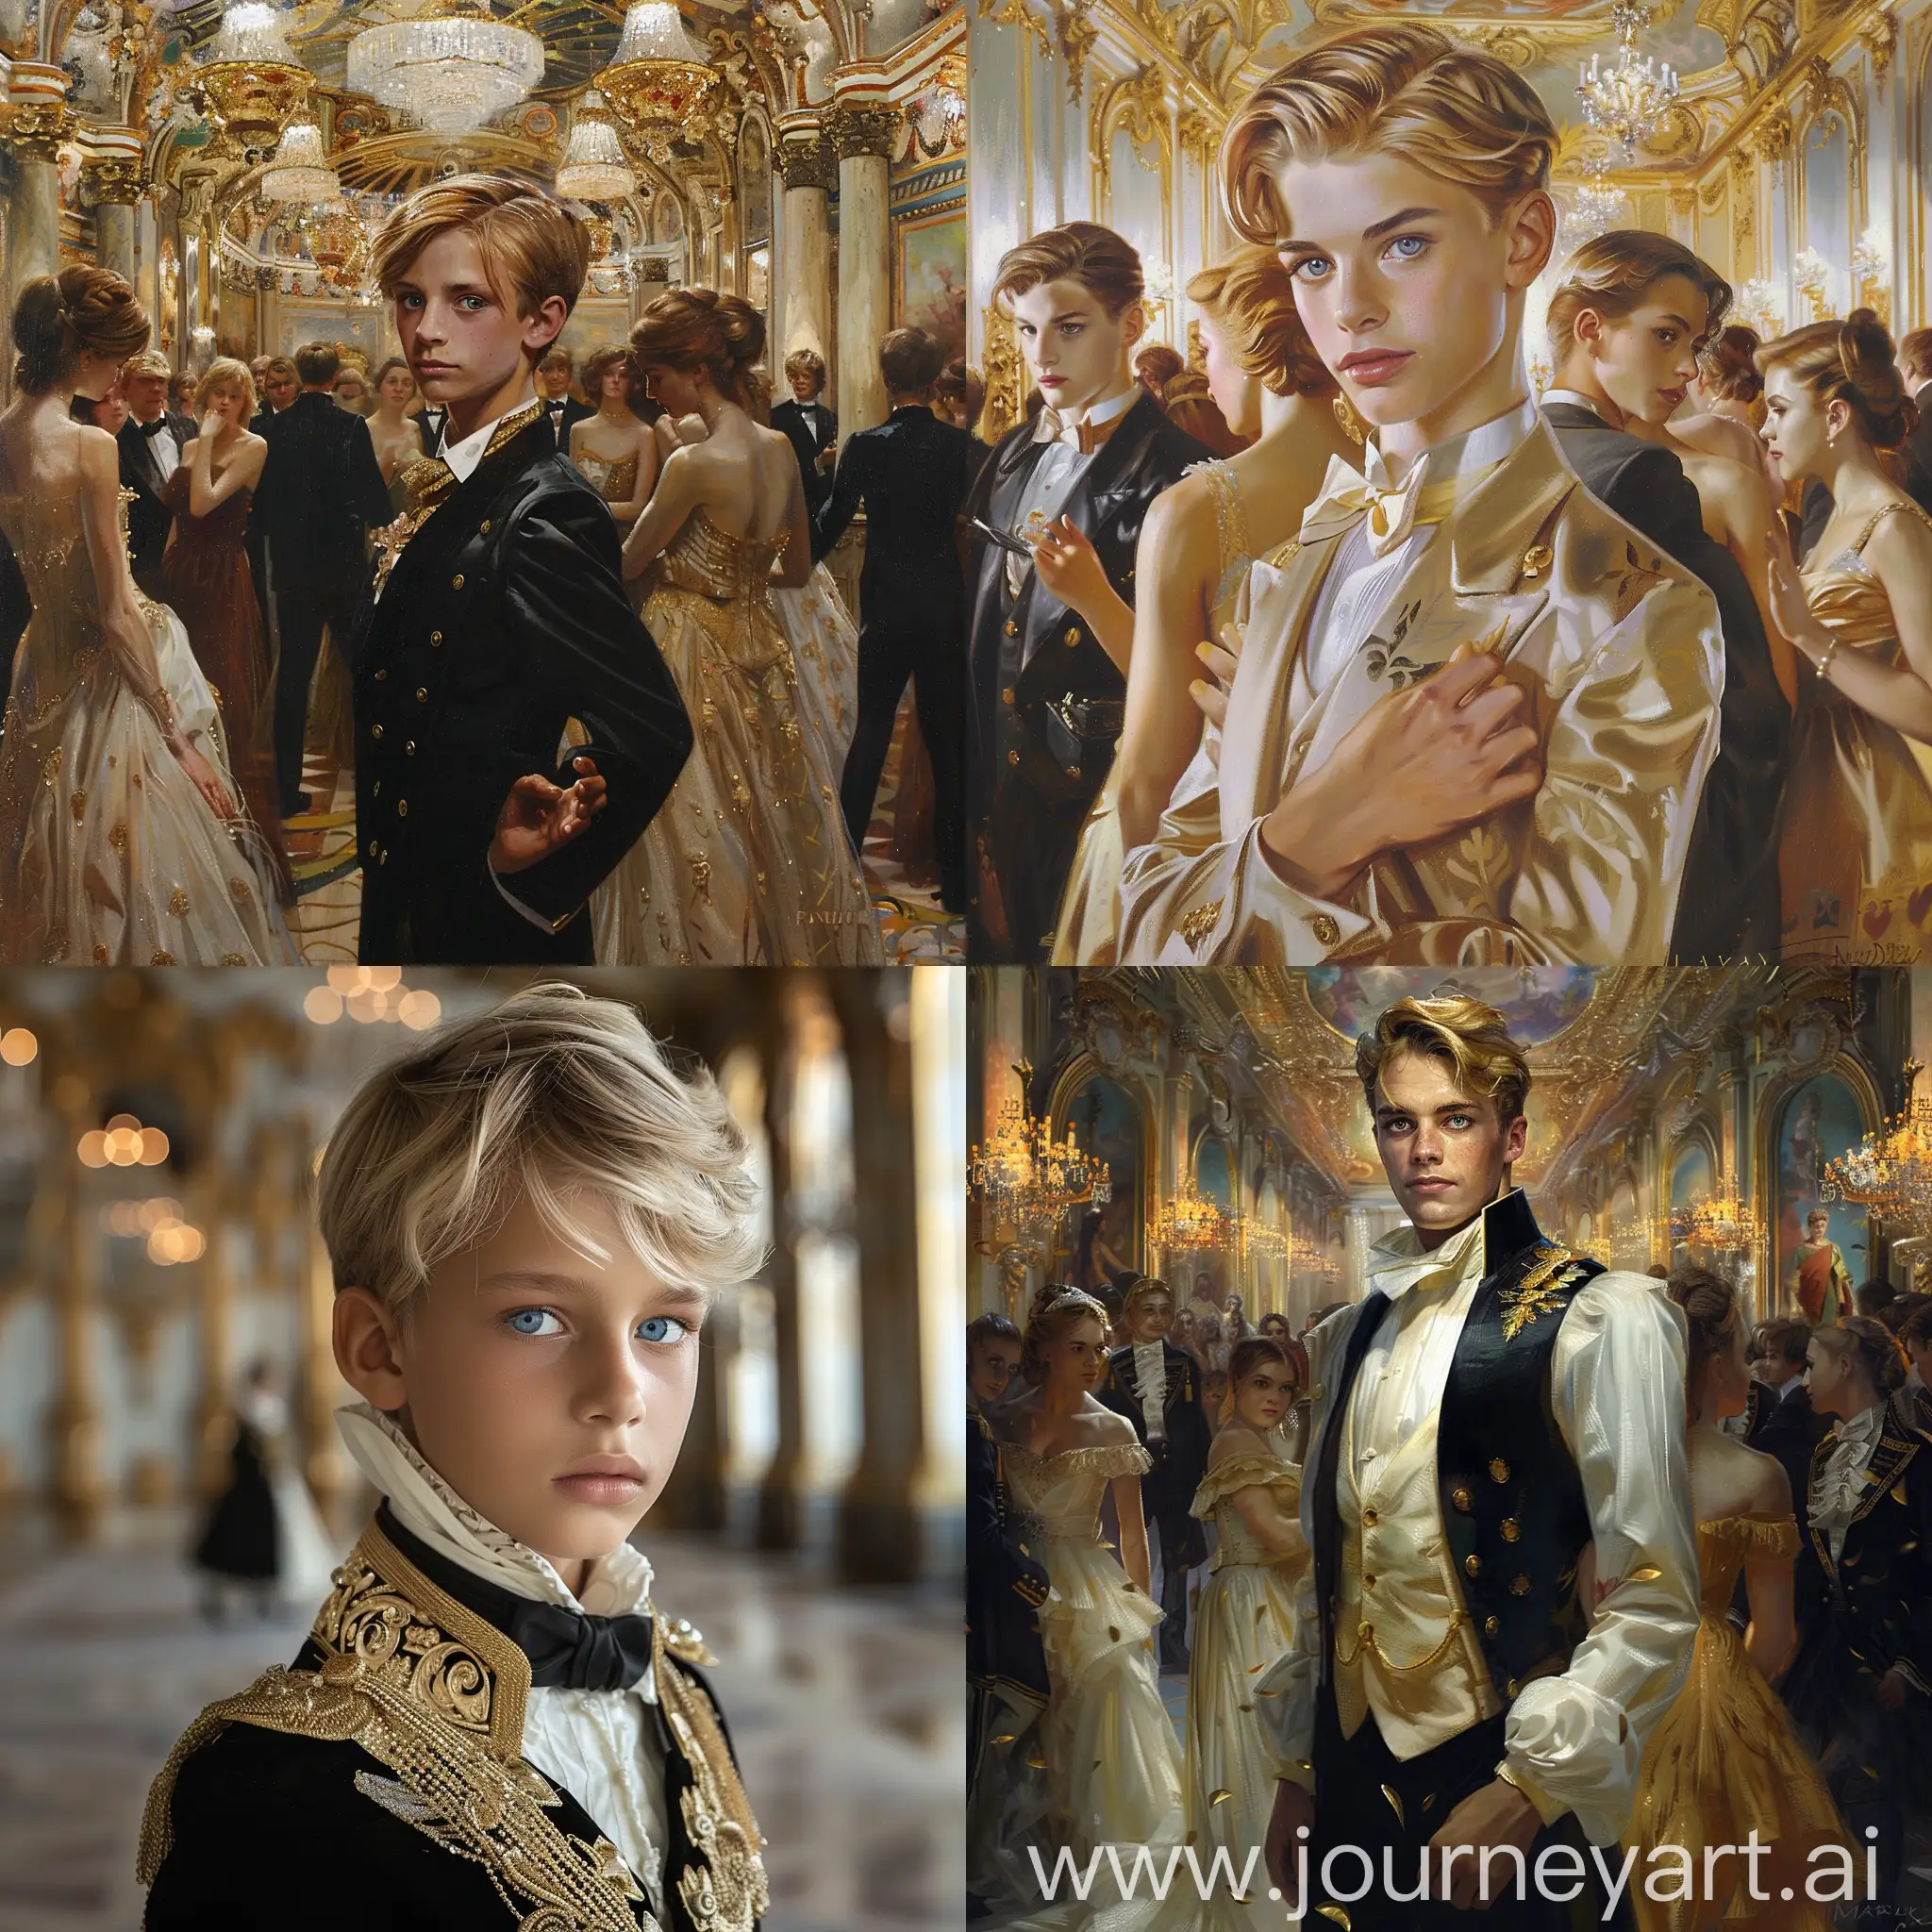 Aristocratic-14YearOld-Boy-at-Modern-Ball-with-Blonde-Girls